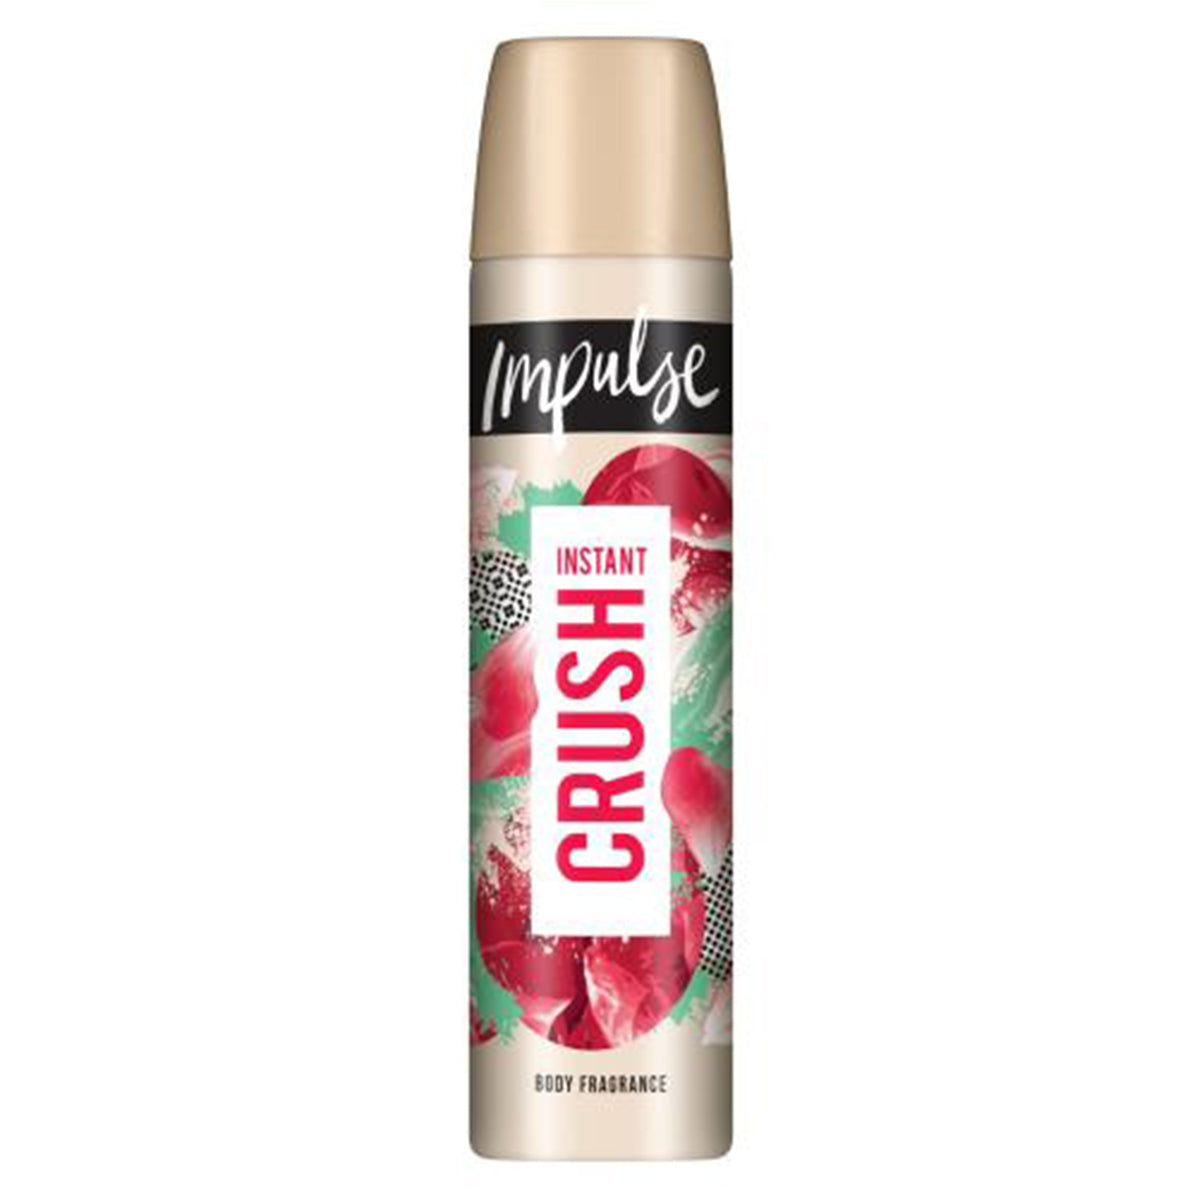 An image of an Impulse - Instant Crush Body Fragrance Spray Deodorant - 75ml bottle with a flower on it.